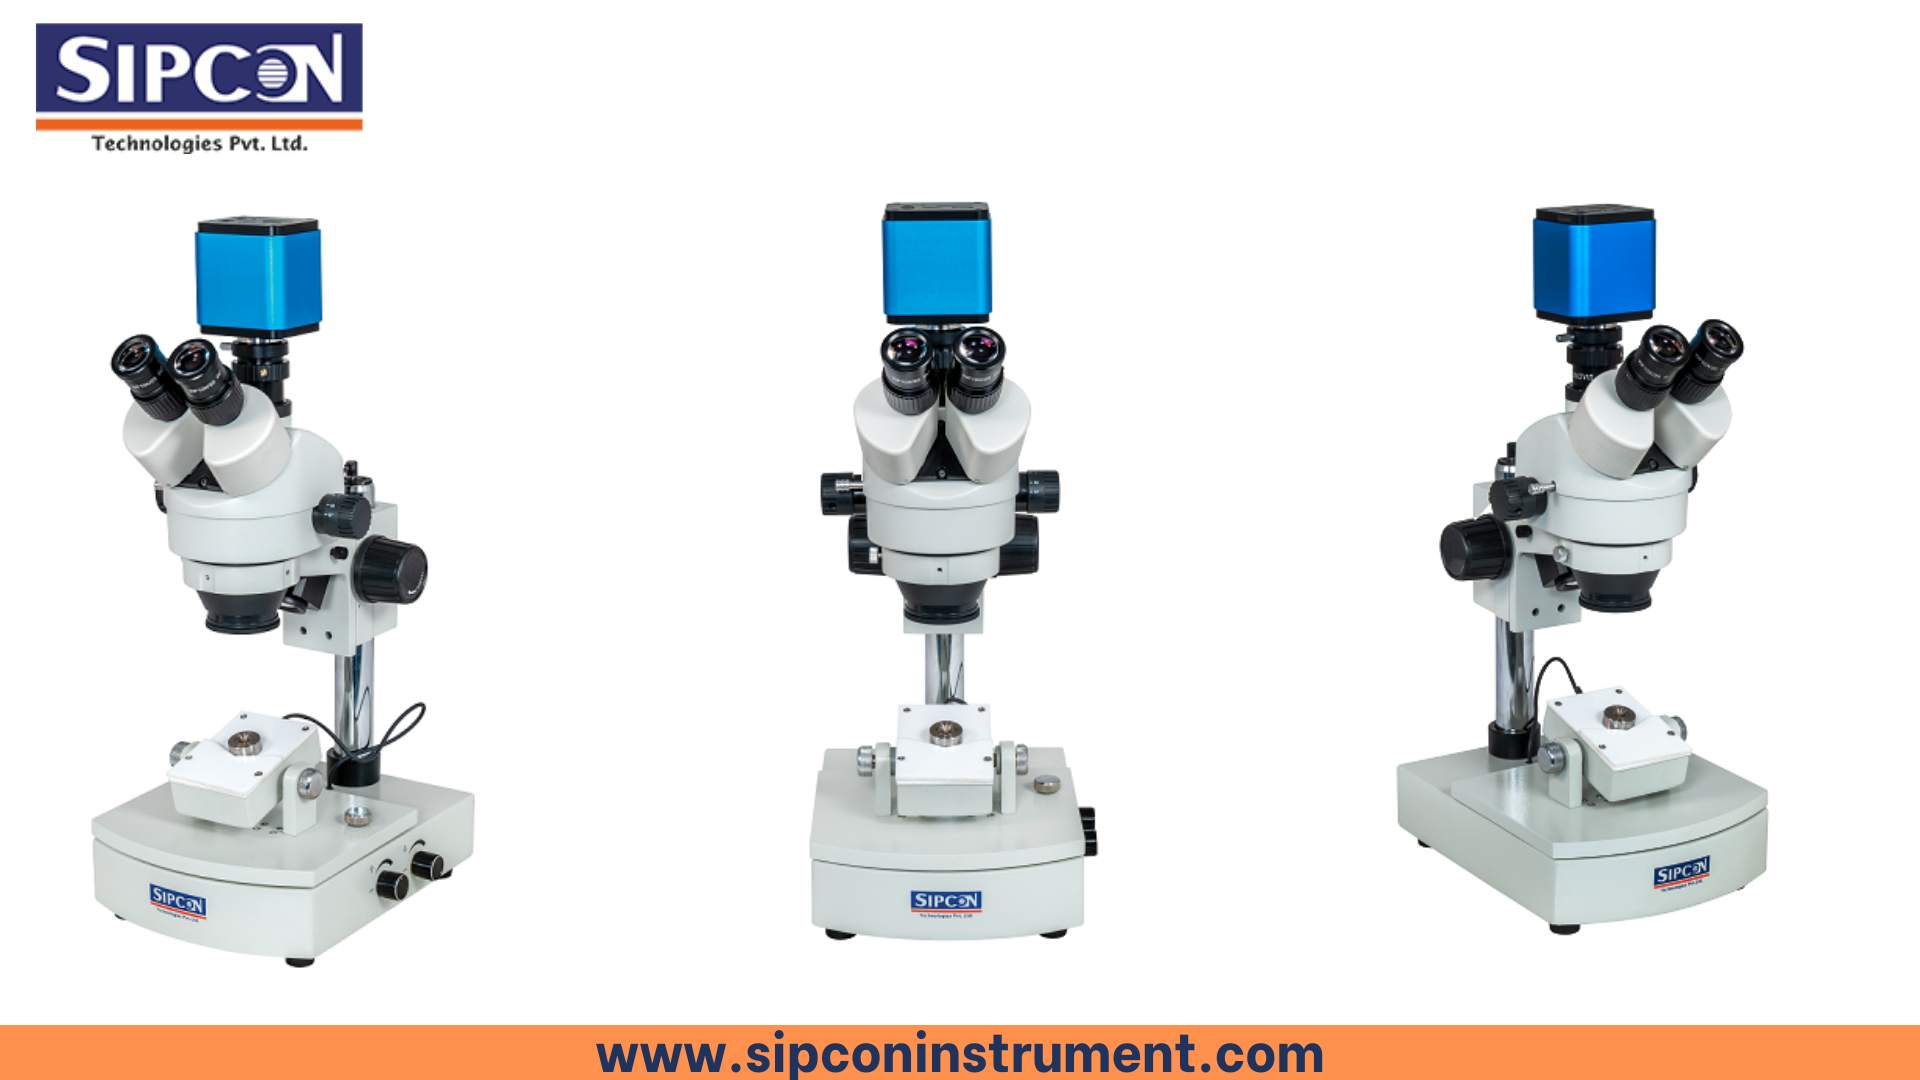 How to Choose the Right Measuring Microscope for Your Application